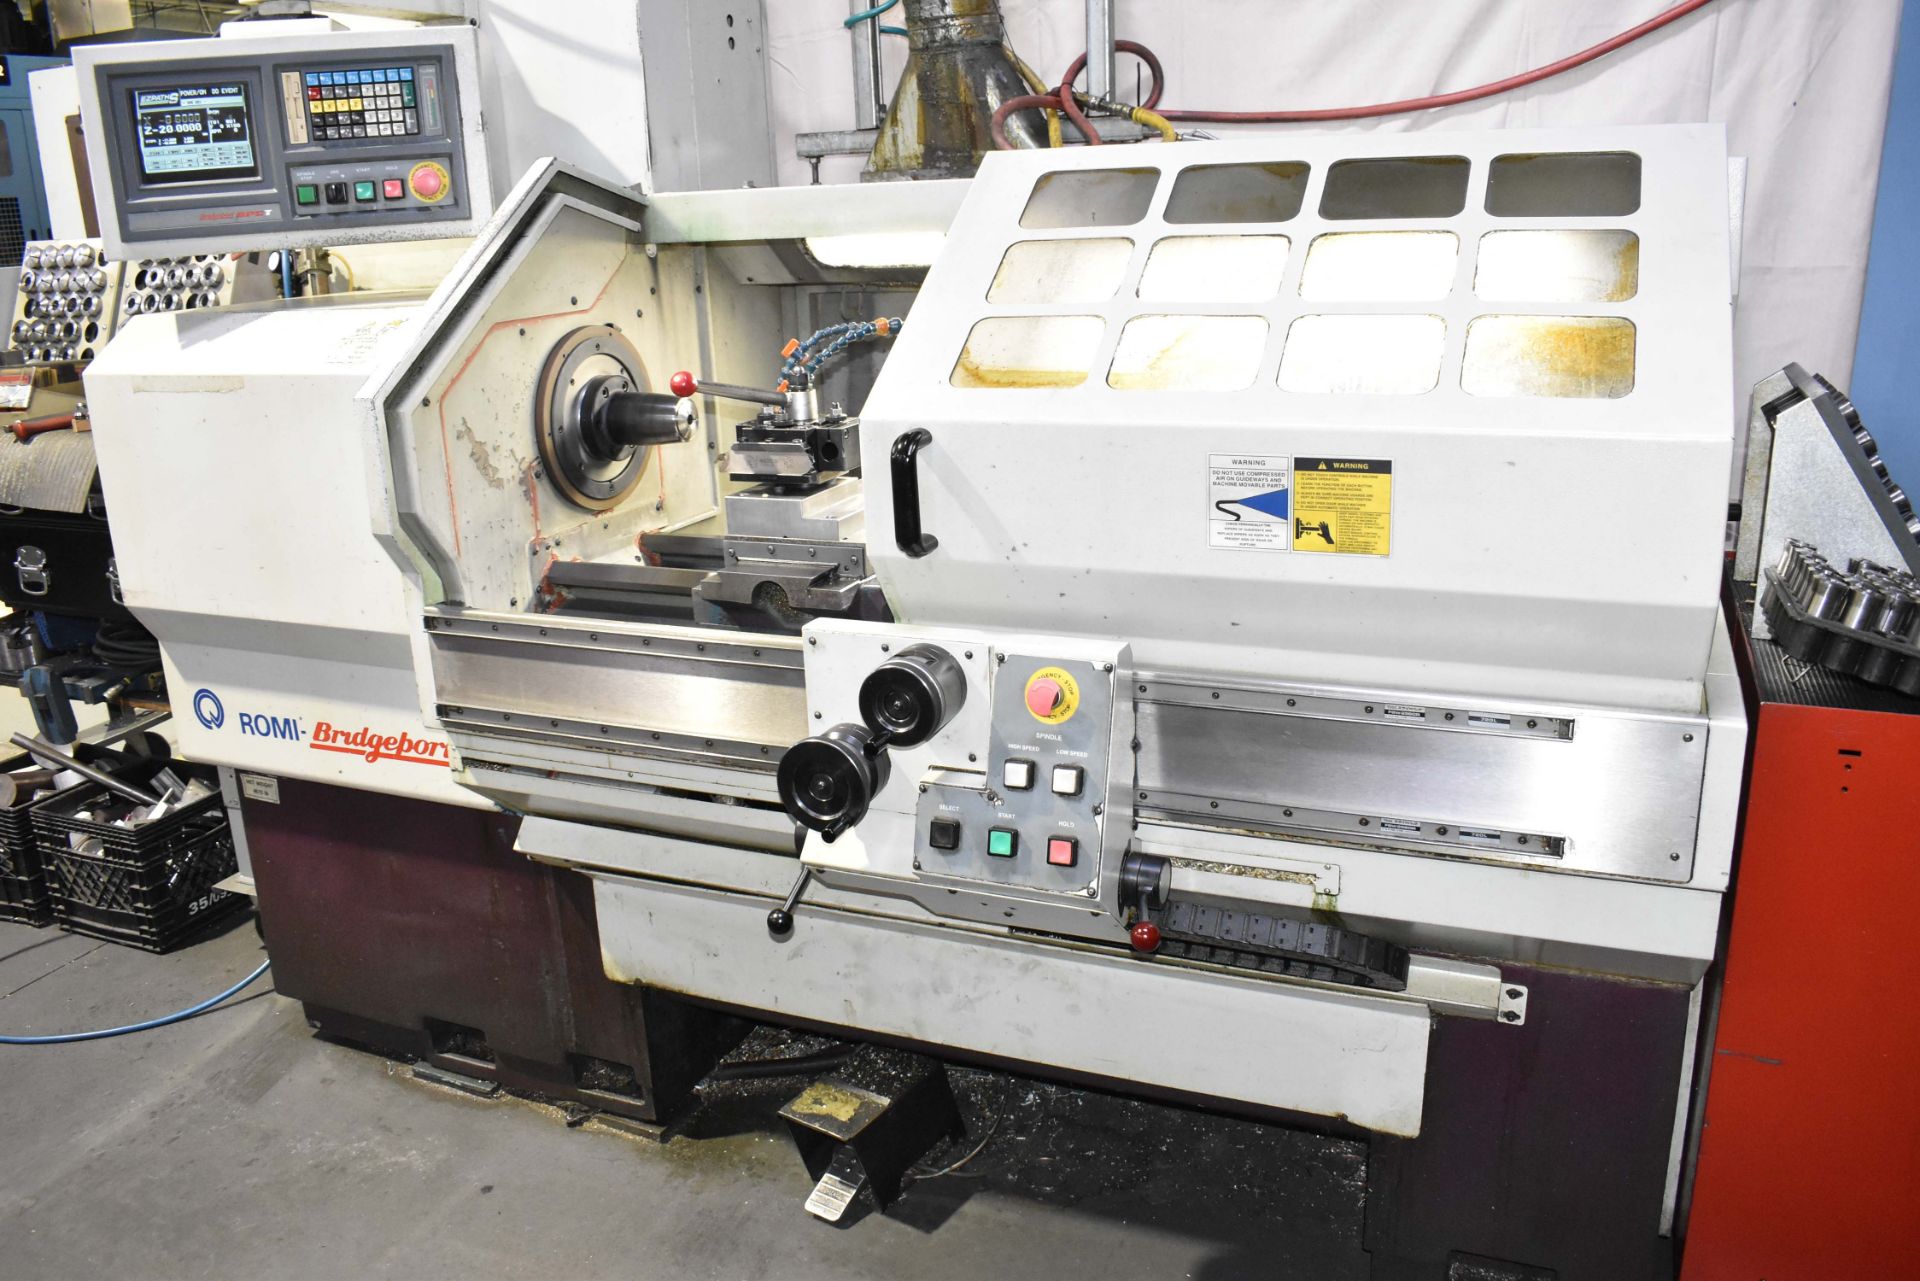 BRIDGEPORT EZ-PATH SD CNC LATHE WITH 40" DISTANCE BETWEEN CENTERS, 17" SWING OVER BED, 8" SWING OVER - Image 2 of 11